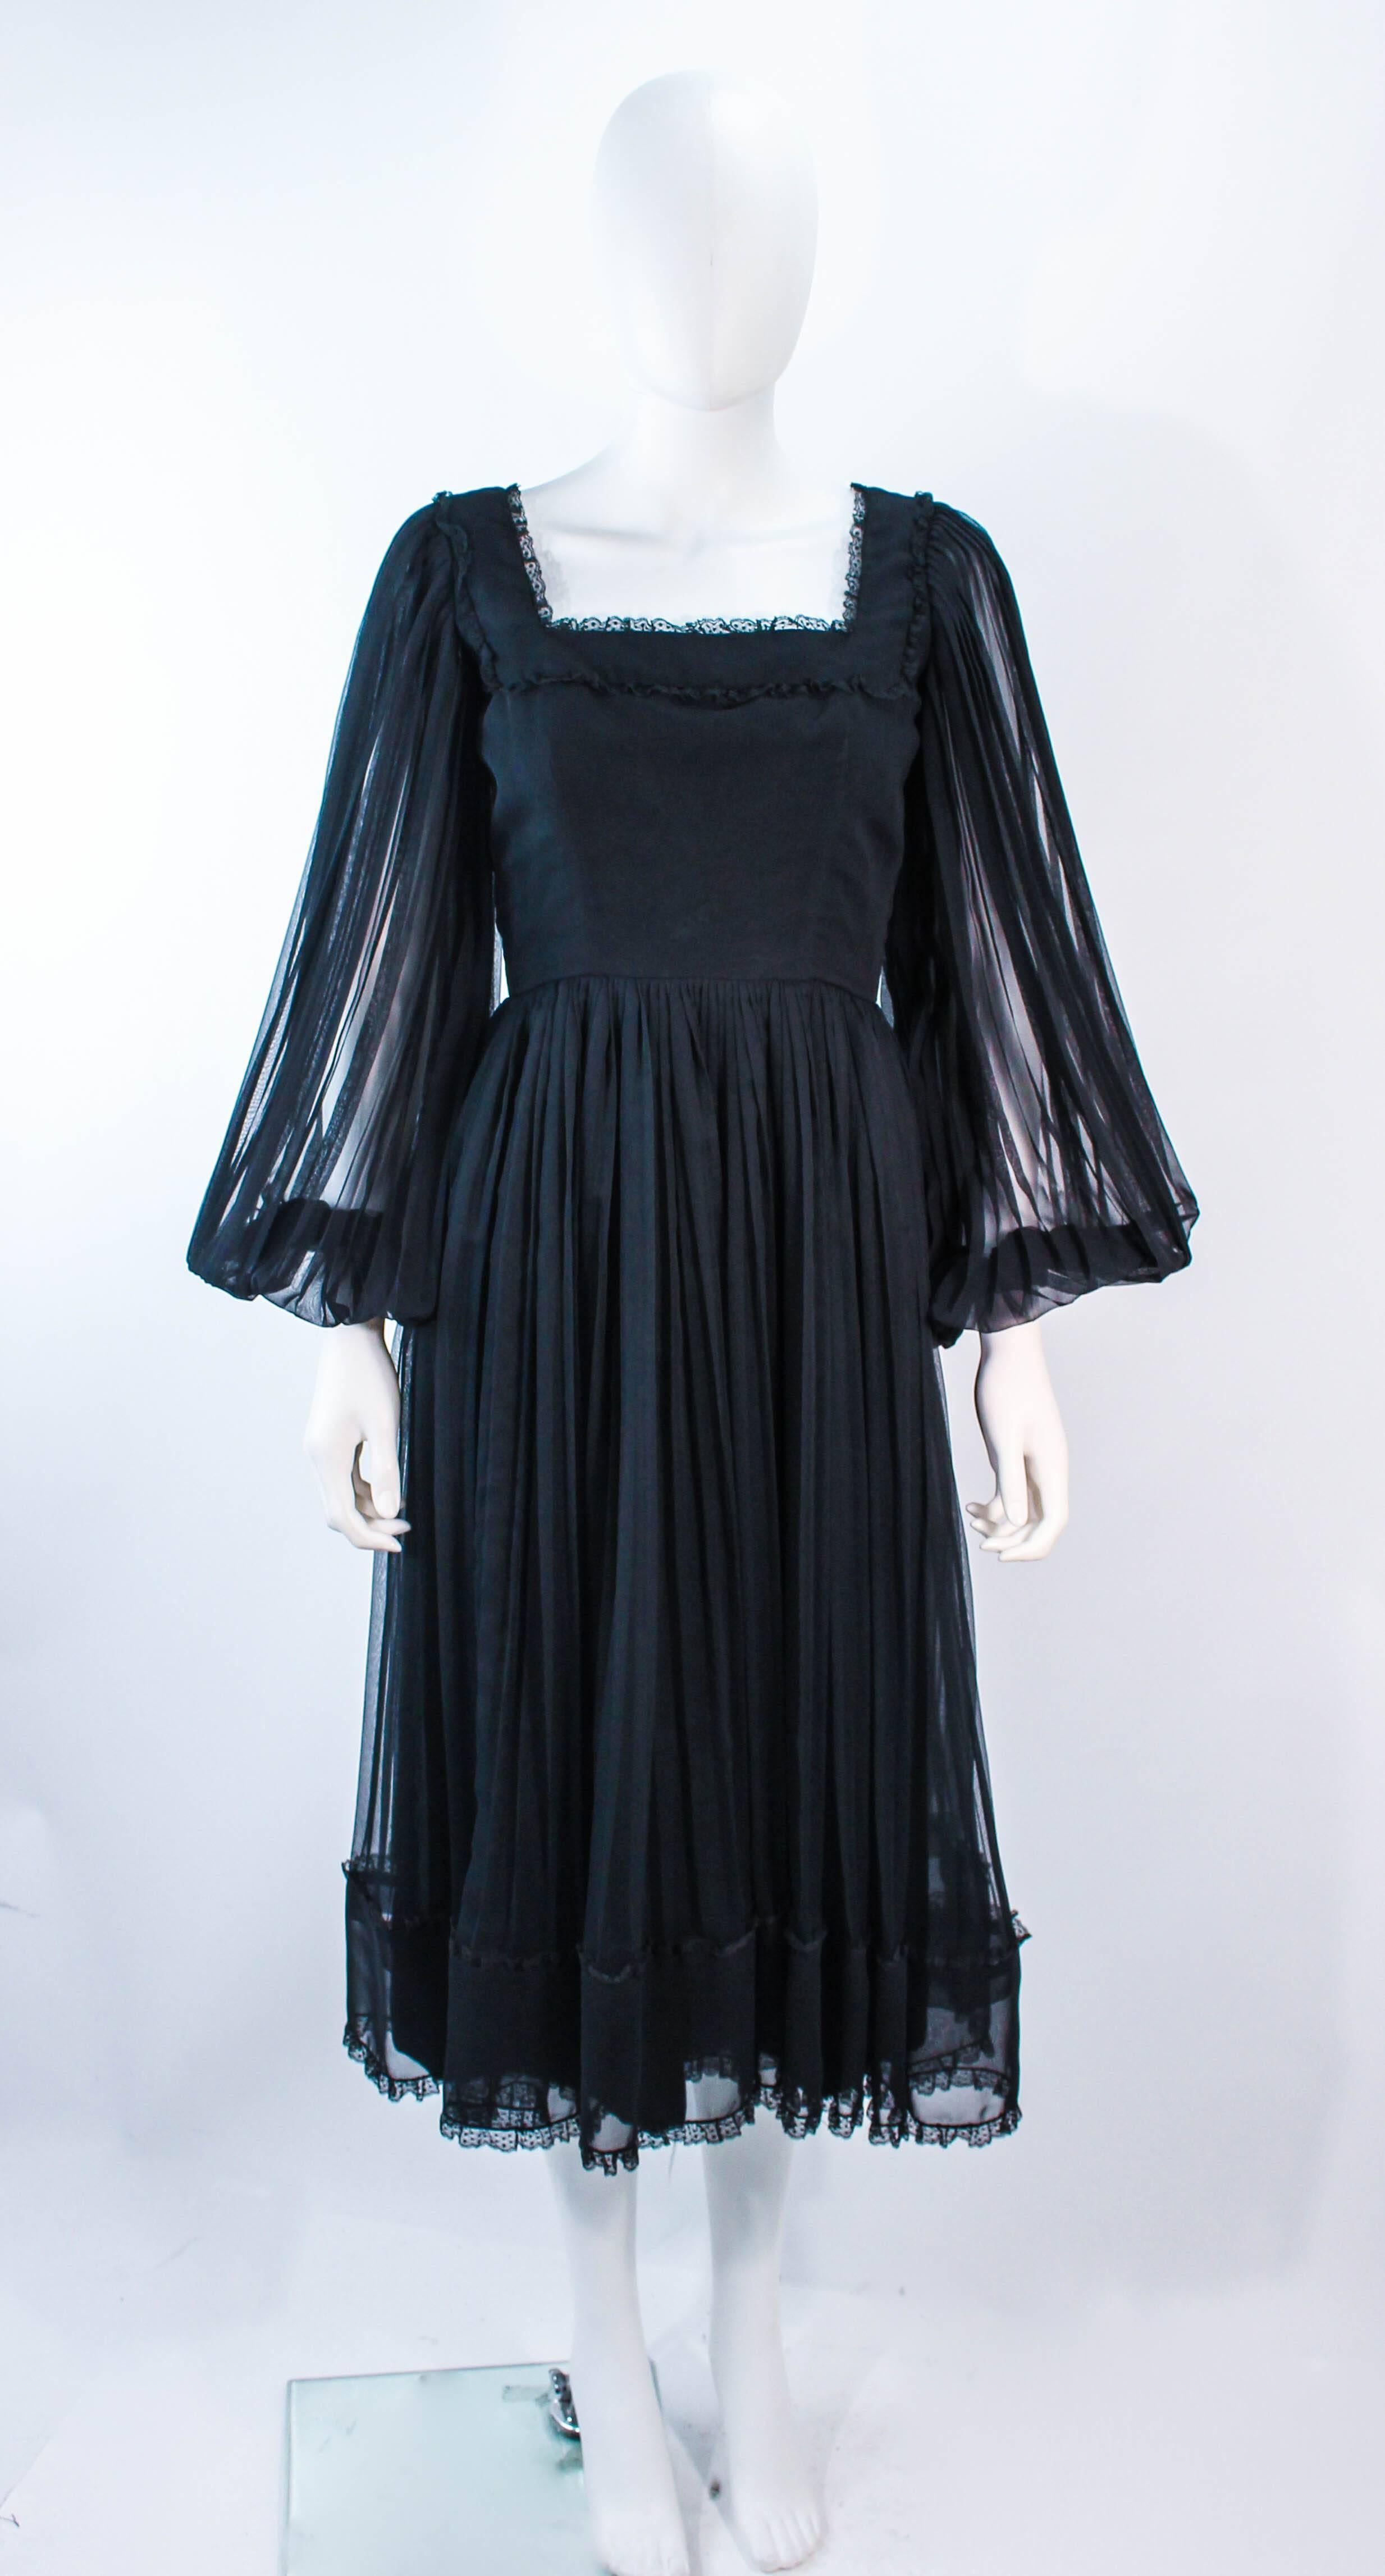 This Jean Louis dress is composed of a black sheer chiffon textured fabric with lace trim. Features pleated sheer sleeves with a beautiful square neckline. There is a center back zipper closure. In excellent condition. 

**Please cross-reference